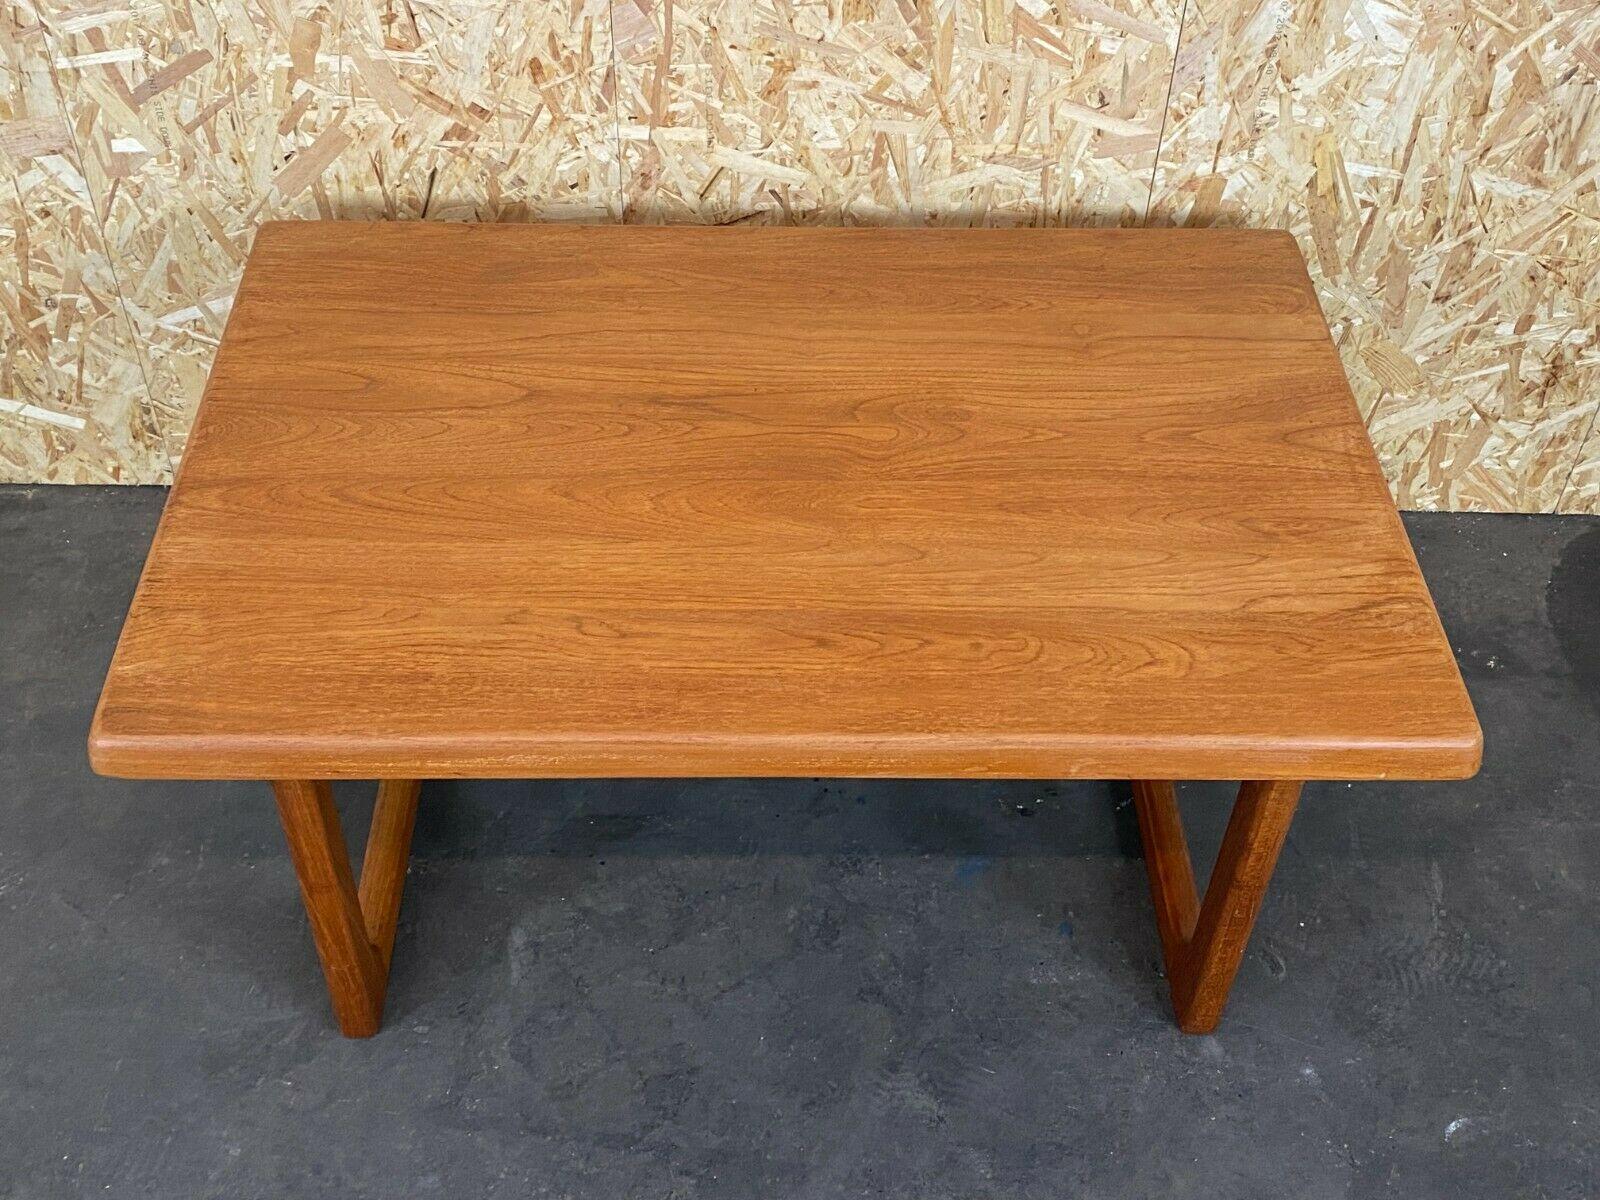 60s 70s Teak Table Side Table Coffee Table Niels Bach Design Denmark In Good Condition For Sale In Neuenkirchen, NI